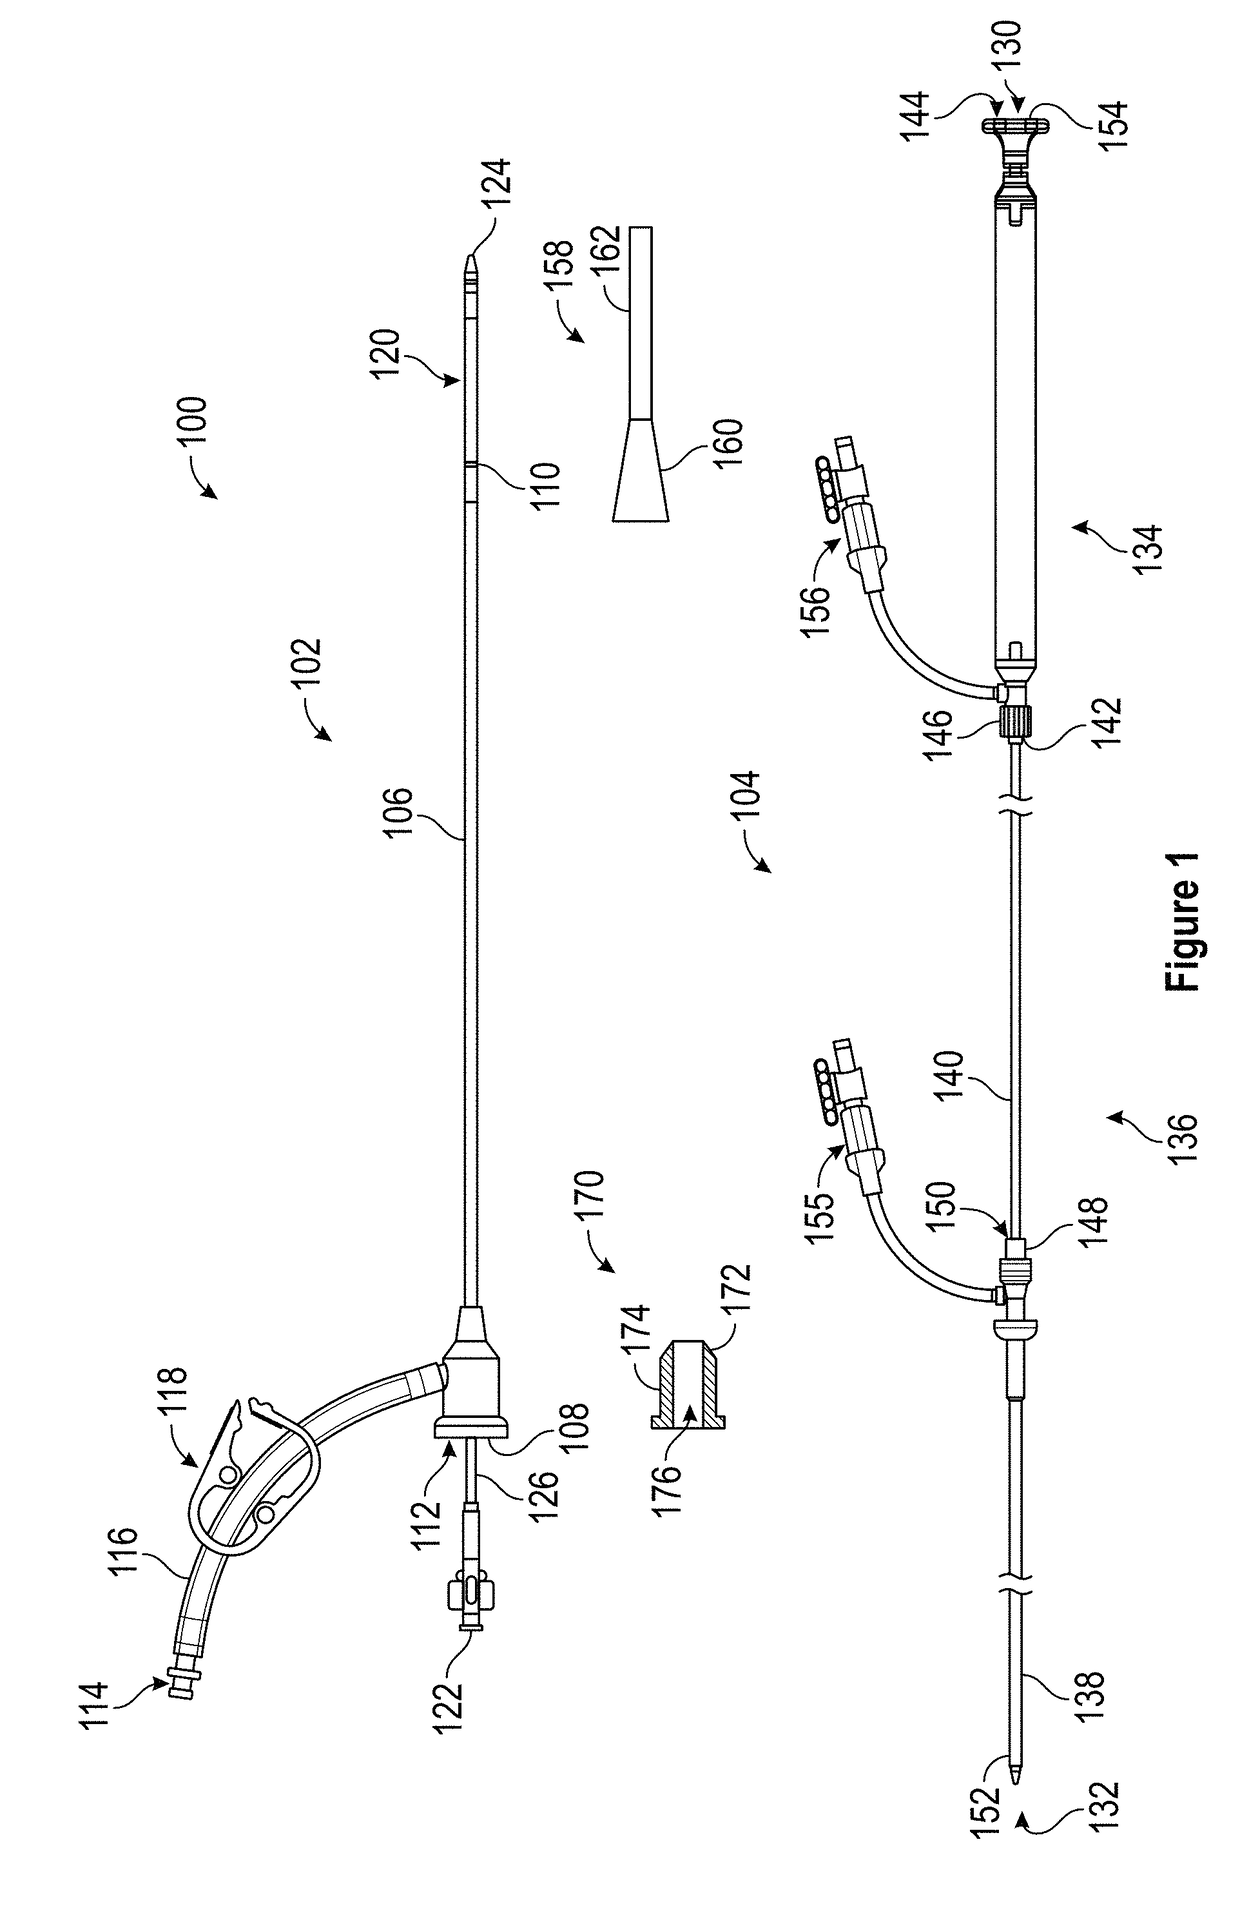 Devices and methods for treating vascular occlusion